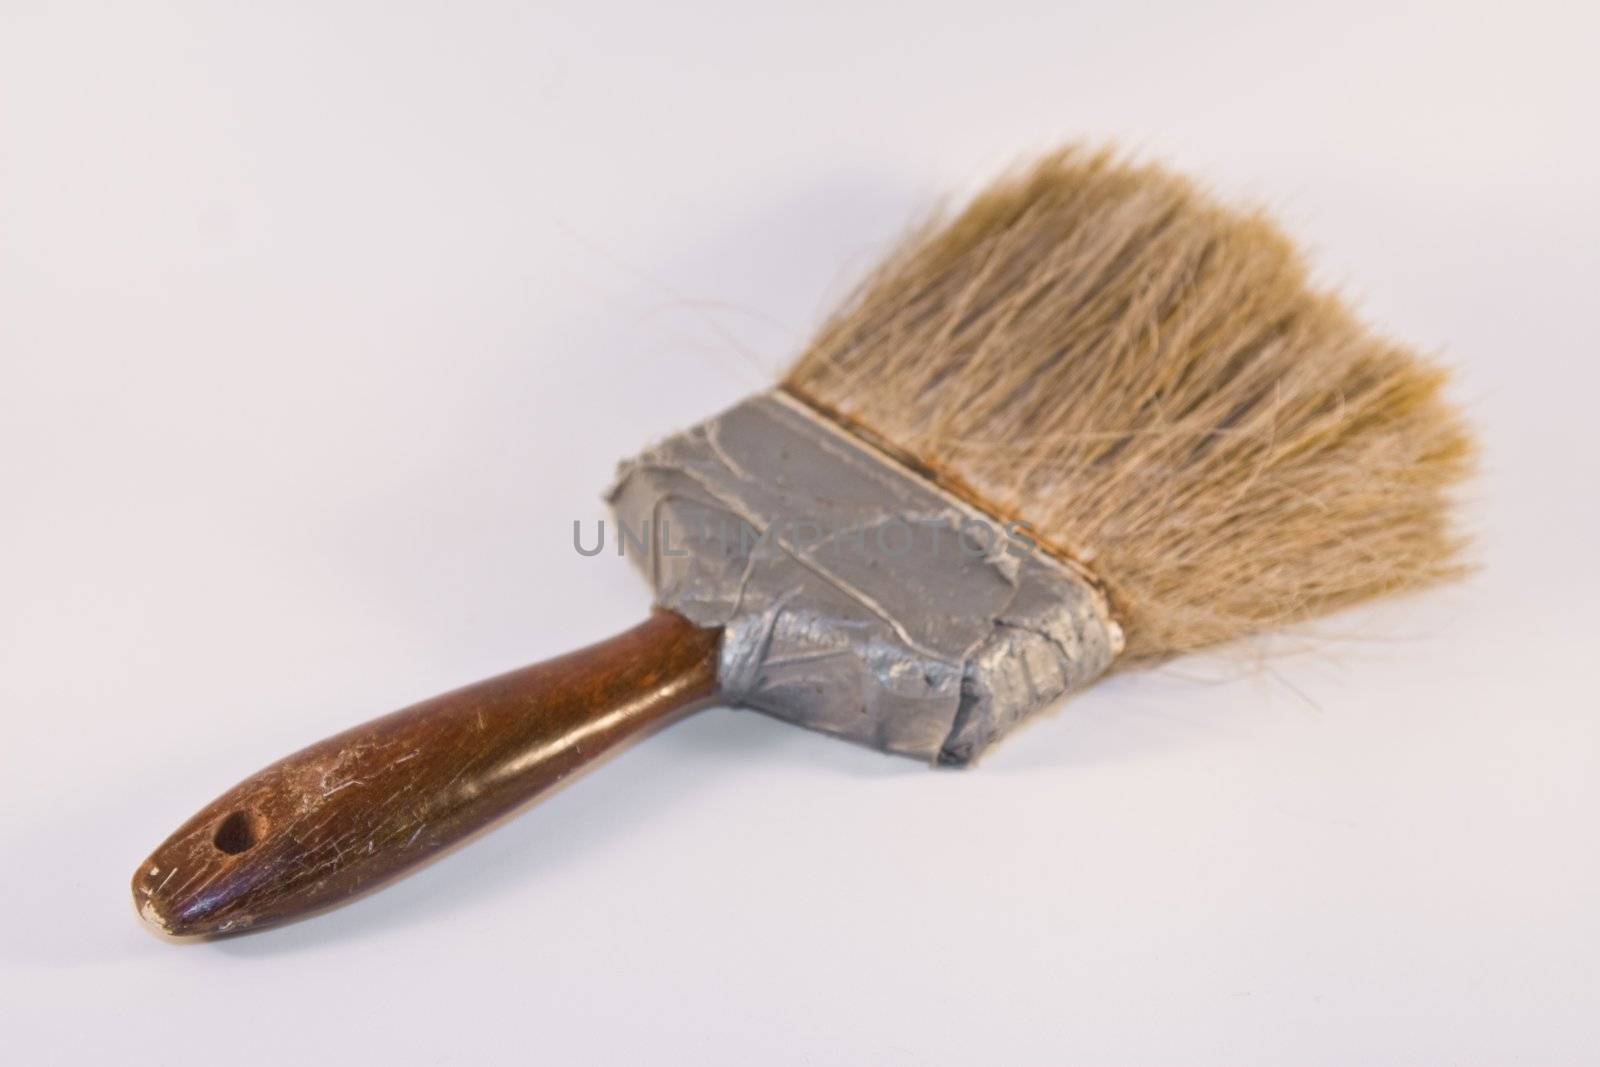 Old paint brush by timscottrom